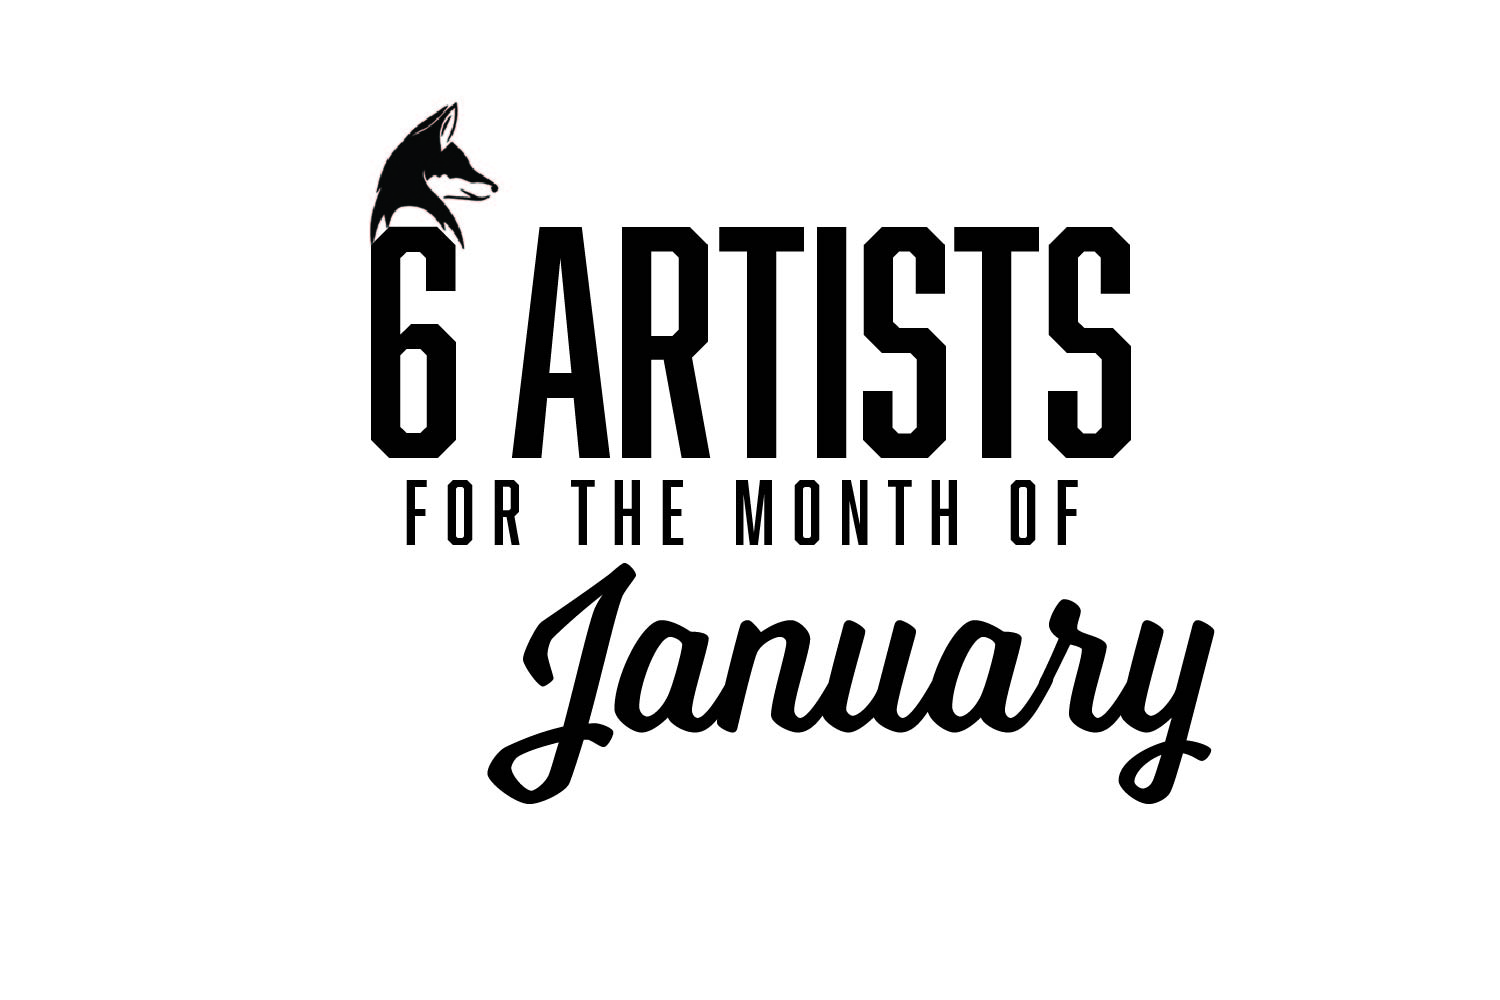 Six Artists You Should Be Listening To: January 2021 EDITION